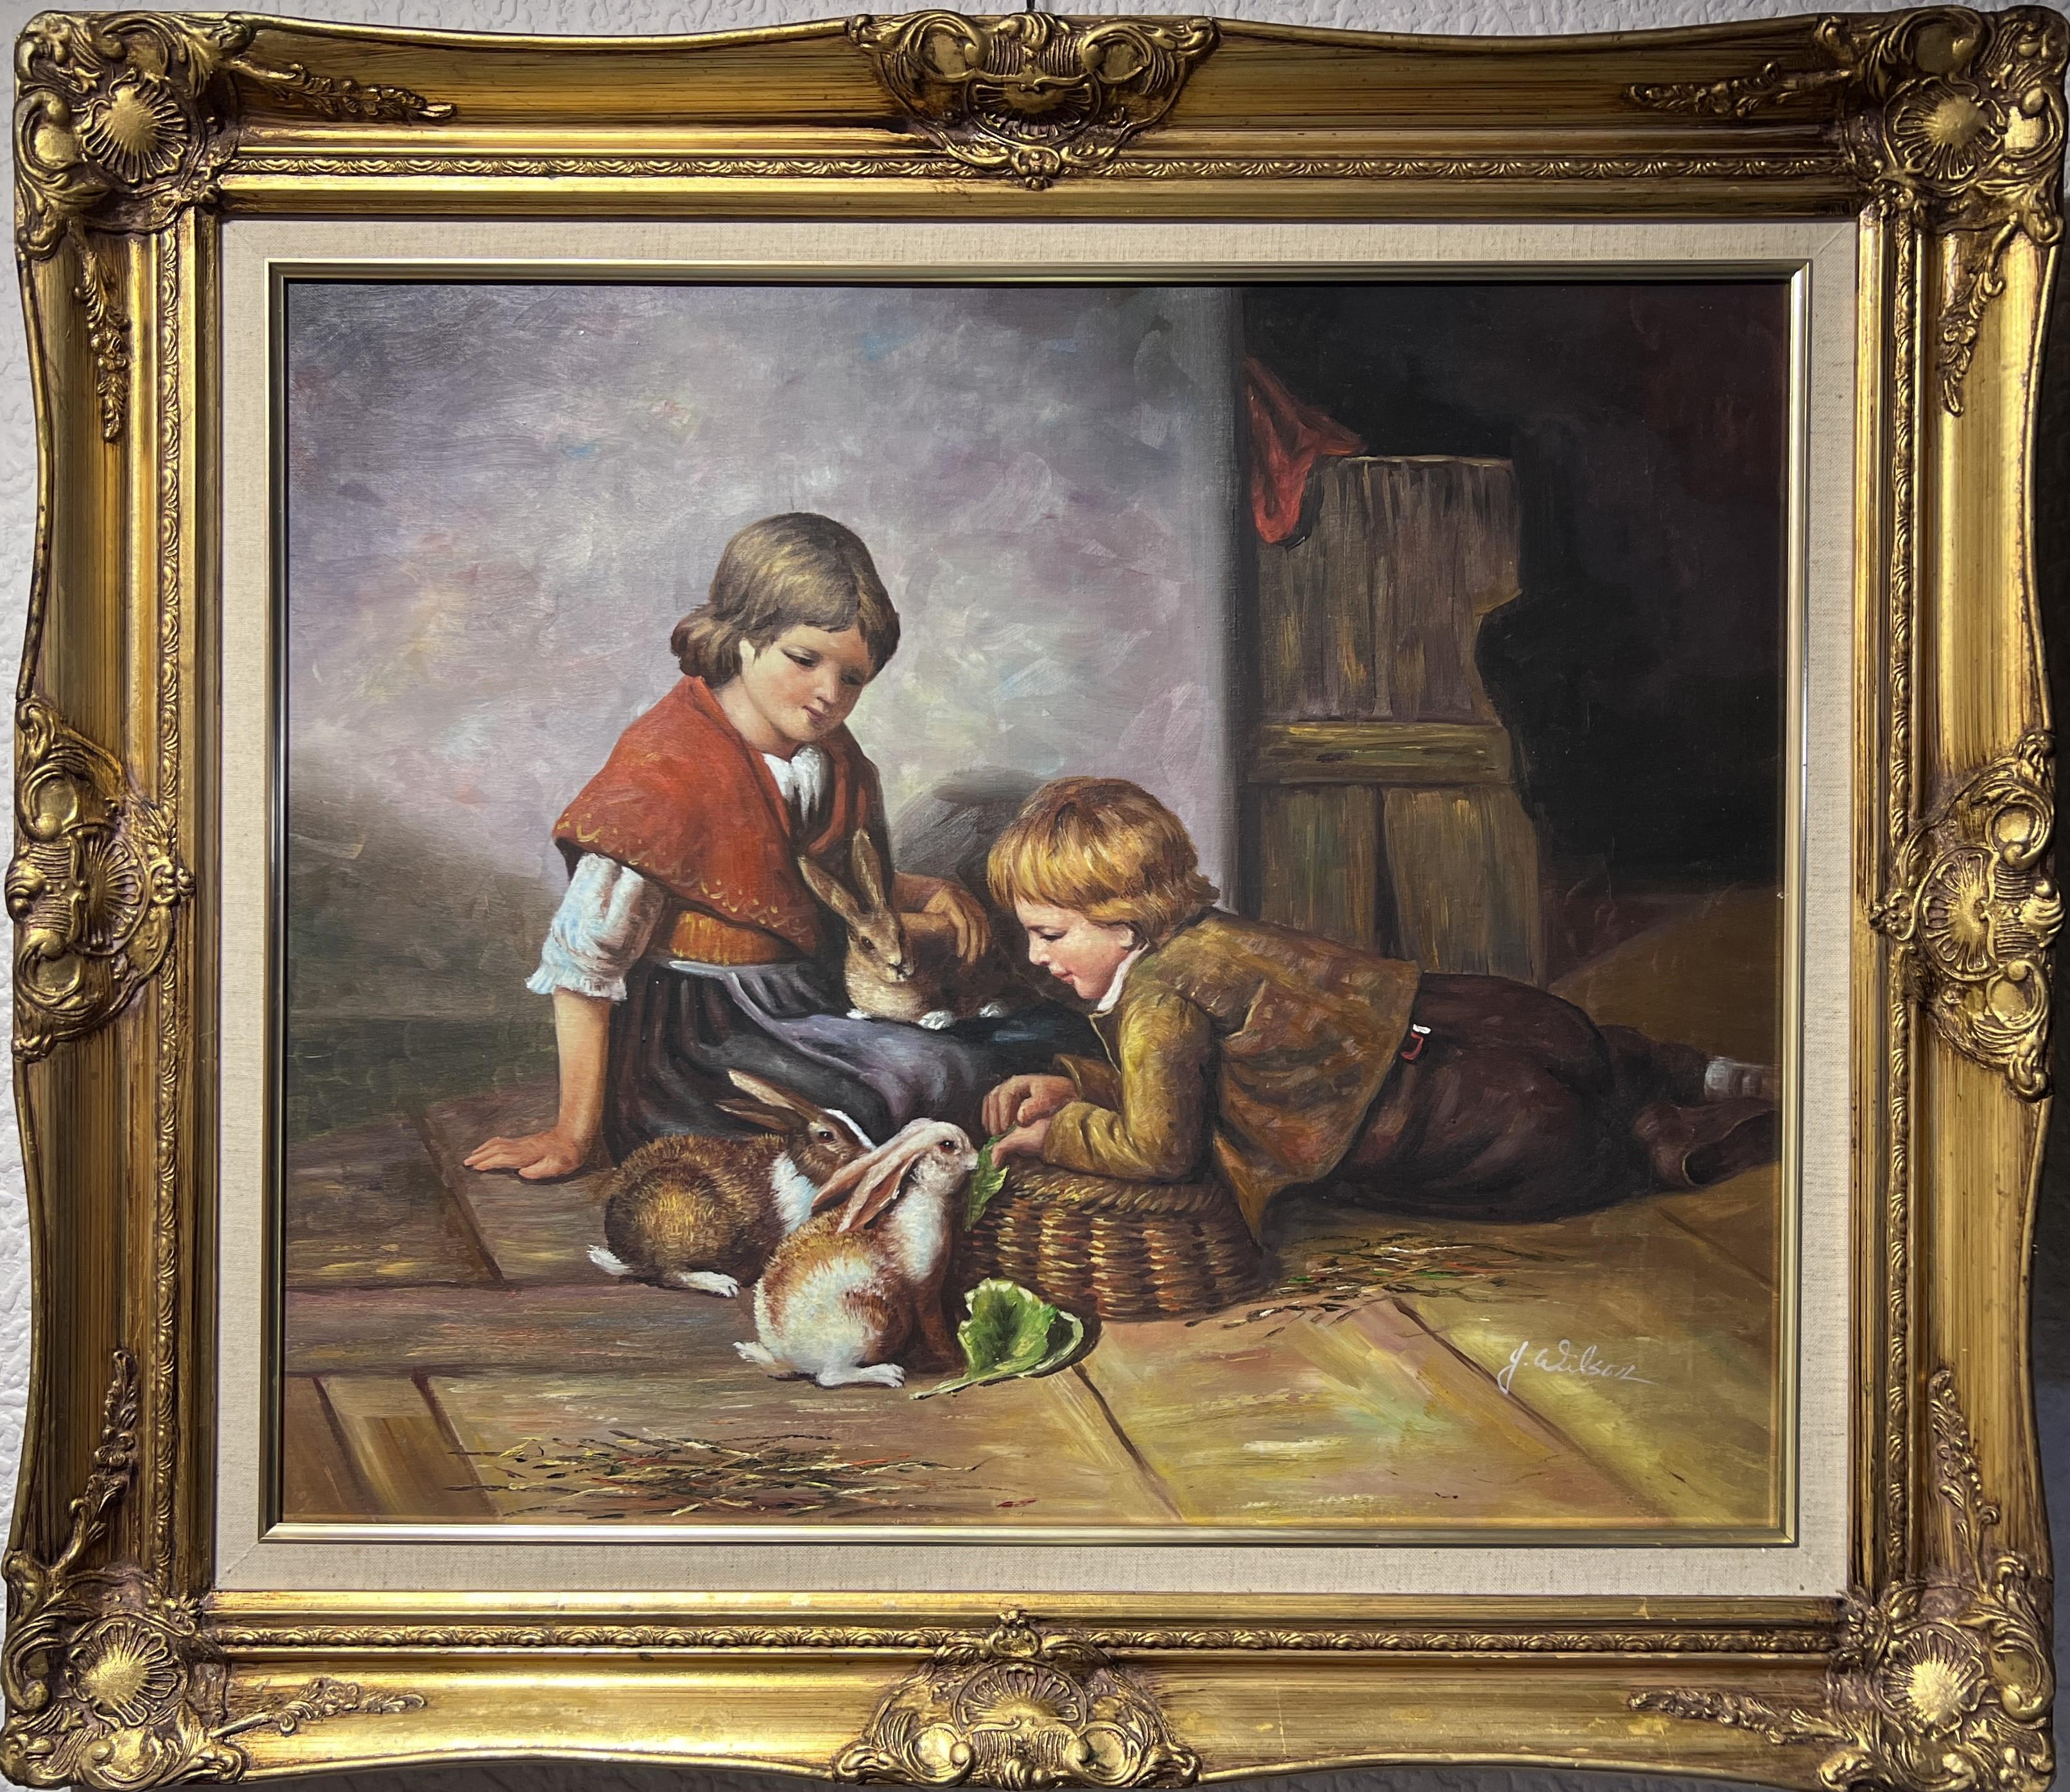 This is a lovely vintage oil painting on canvas capturing a tender moment between two young children and their pet rabbits. One child, dressed in a brown suit, is lying on the floor, closely observing or playing with a rabbit, while the second